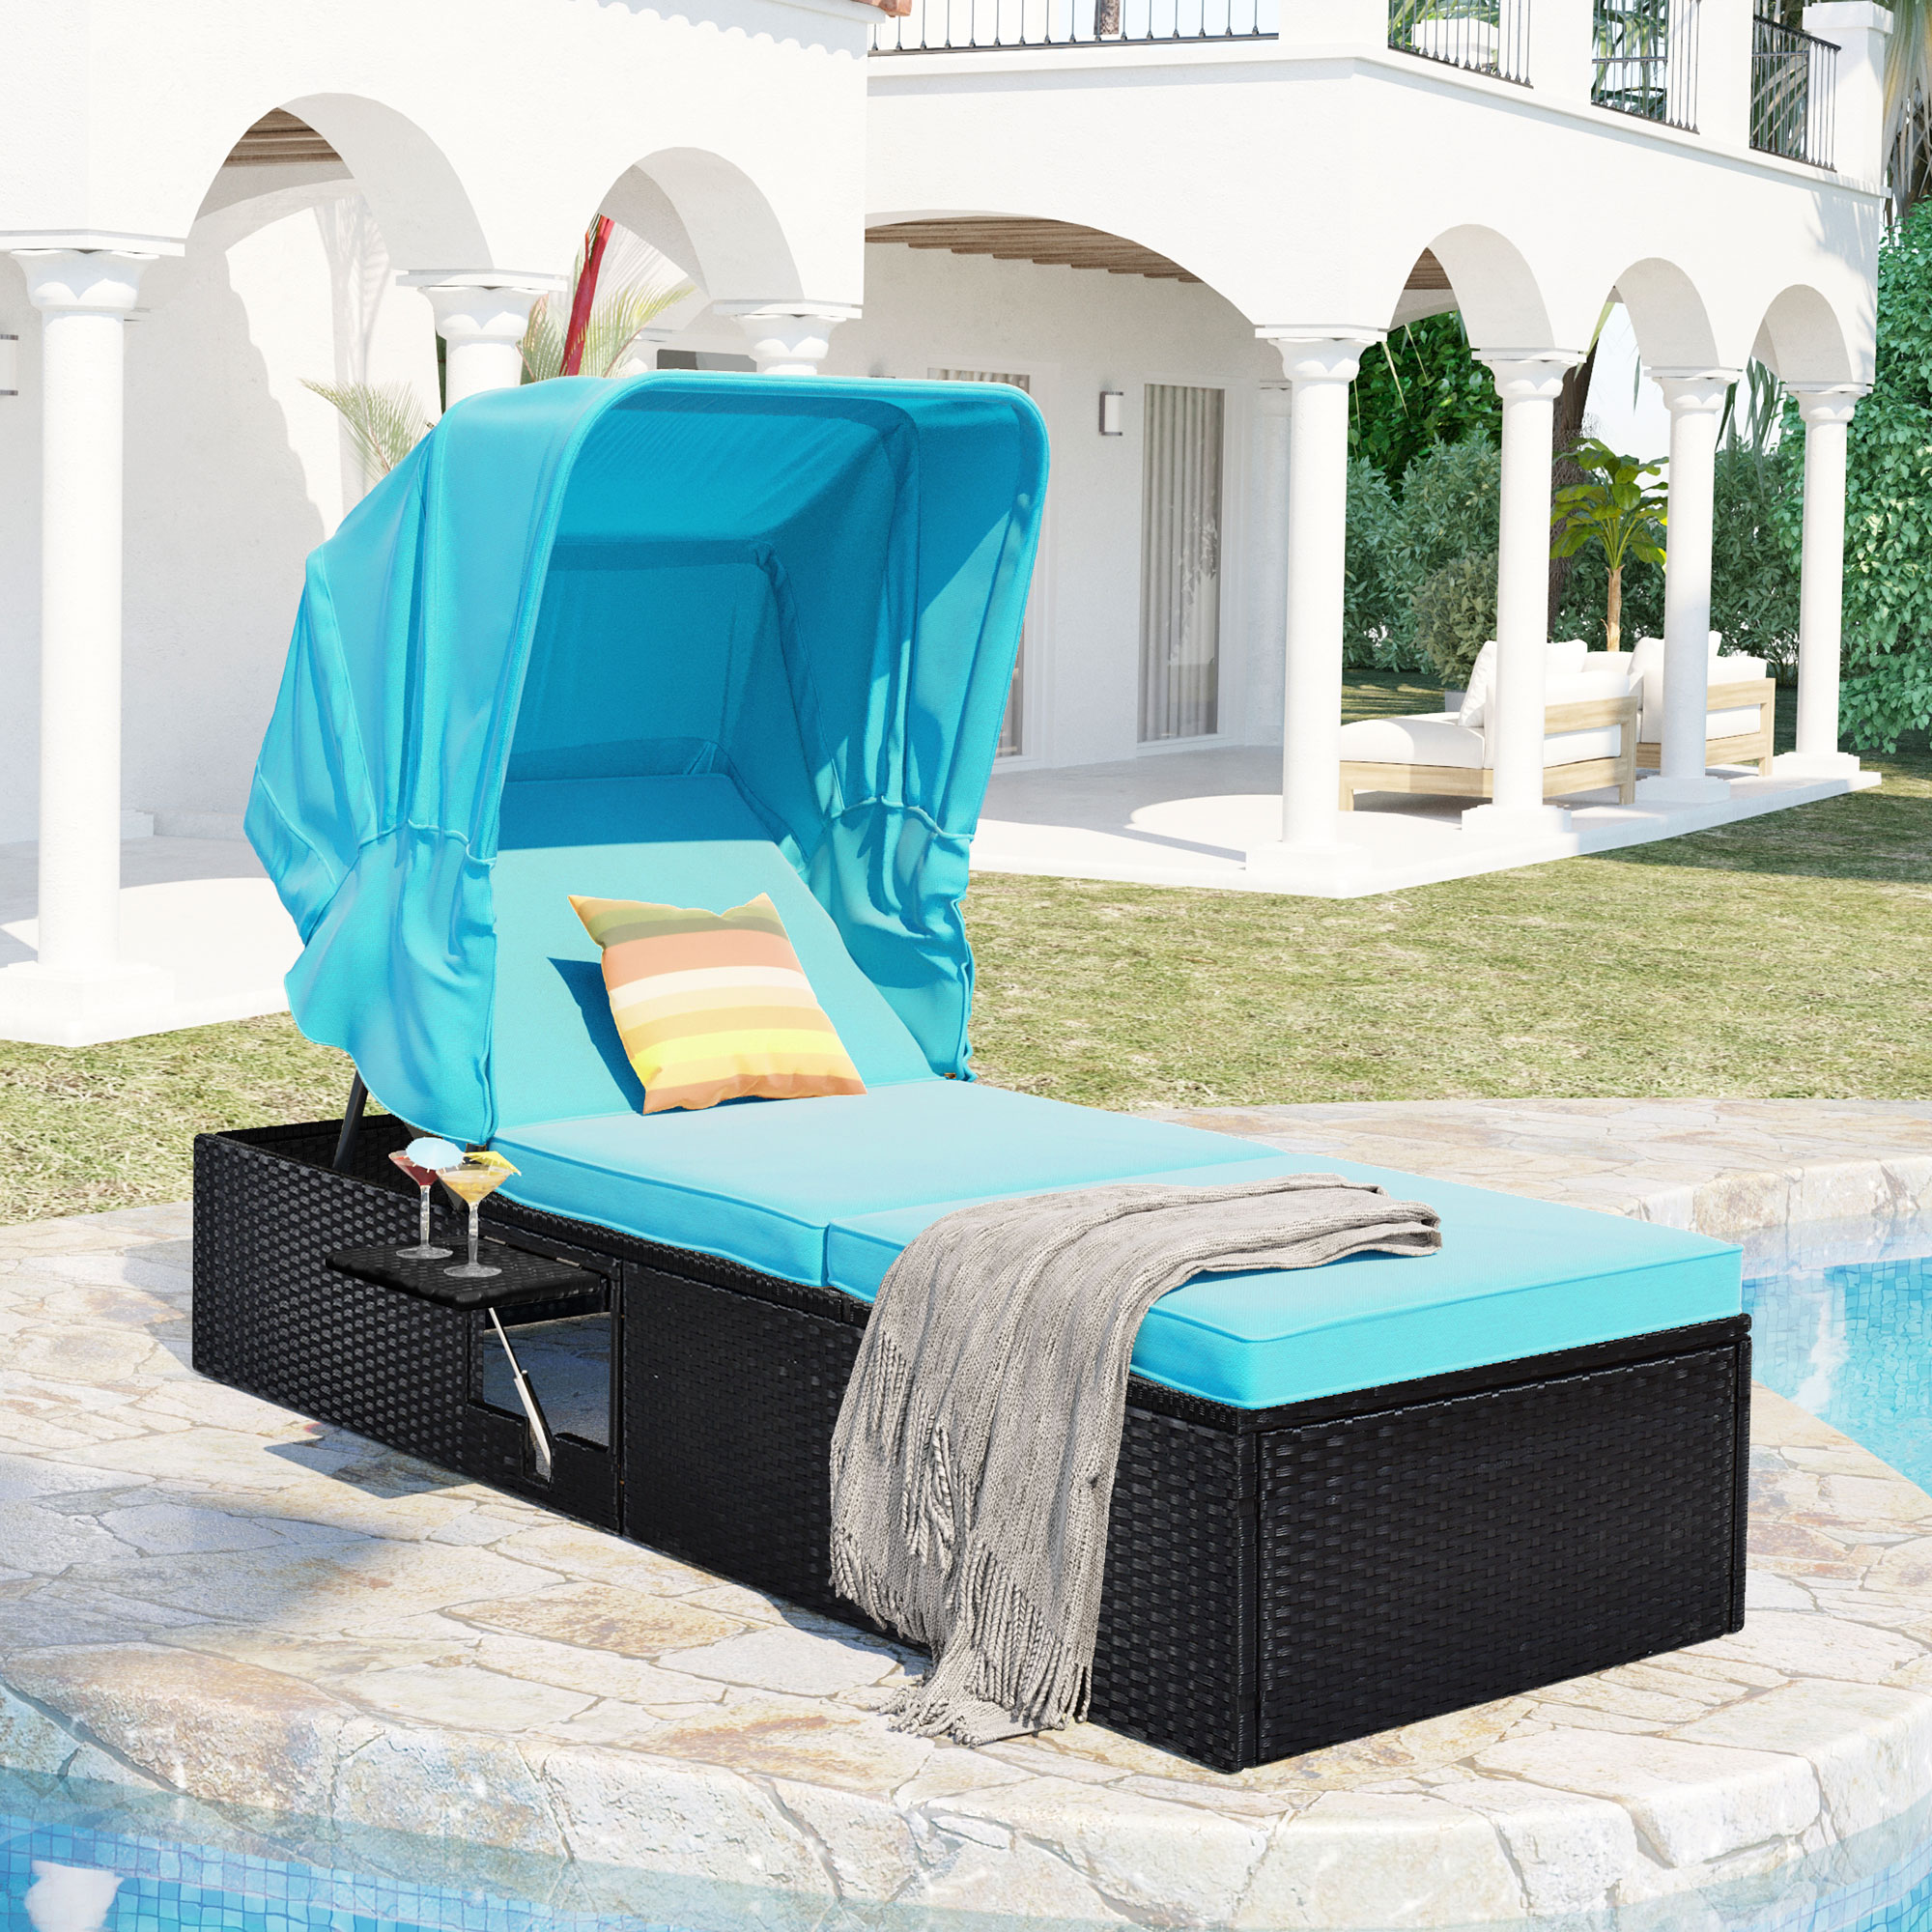 Chaise Lounge Chair for Outdoor, Patio Adjustable Sun Lounger Chair with Canopy, Cup Table and Removable Cushions, PE Wicker Reclining Chaise Chair for Backyard, Poolside, Porch, D8271 - image 2 of 12